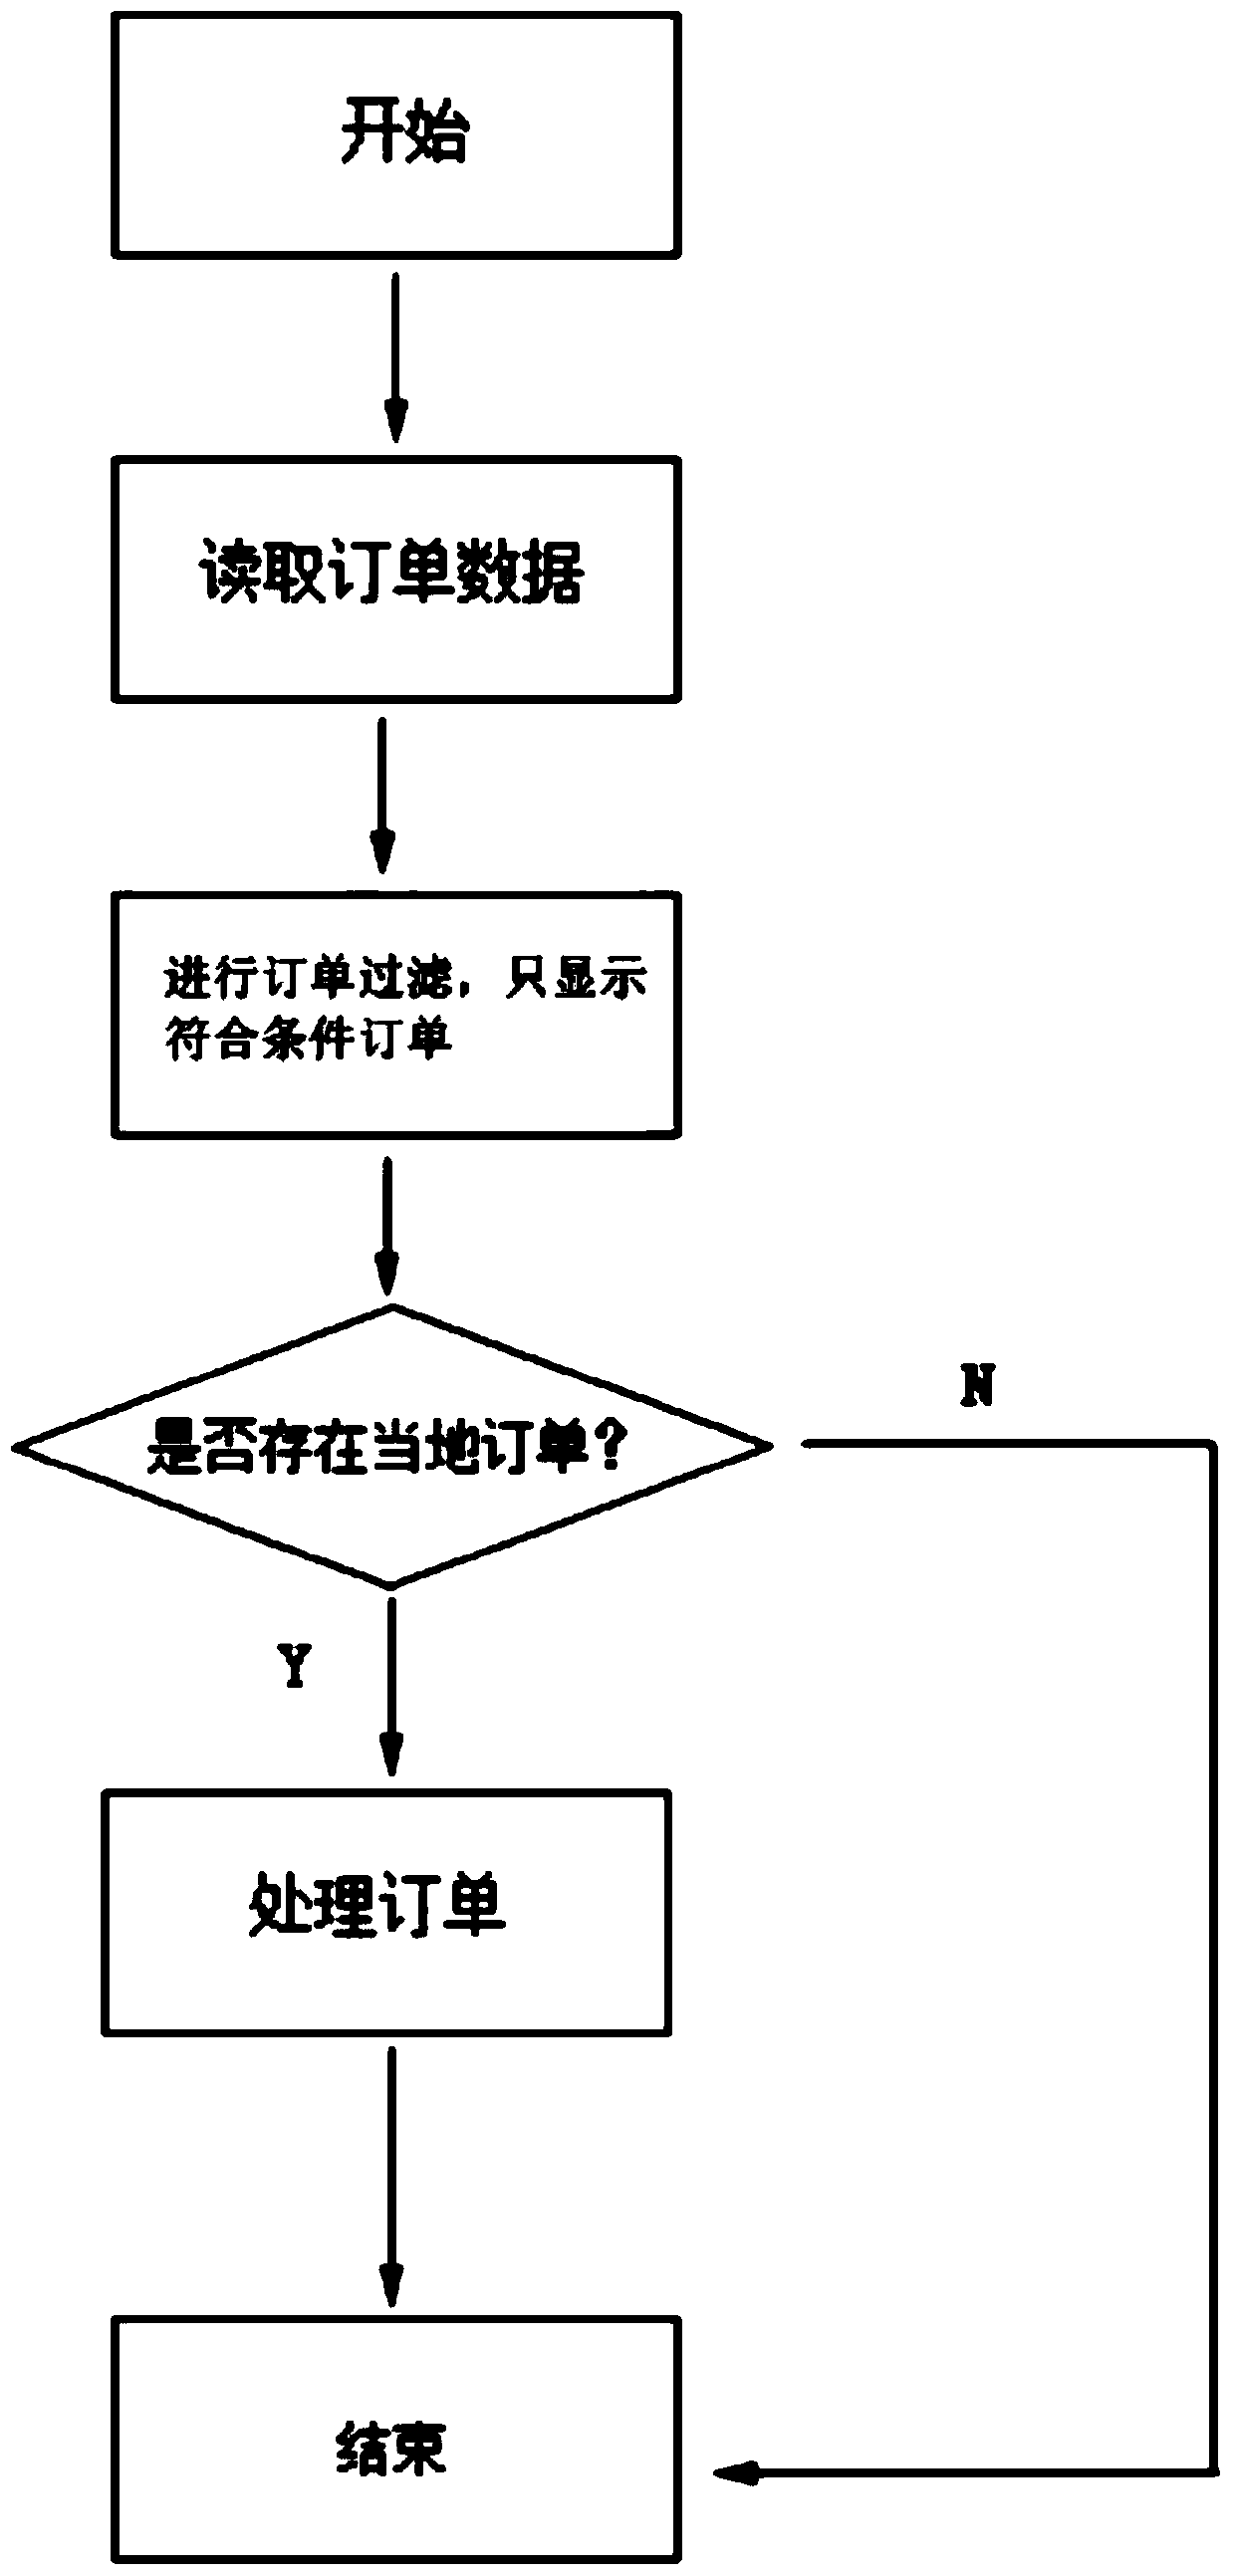 Processing method of order allocation in internet electronic commerce logistics management system